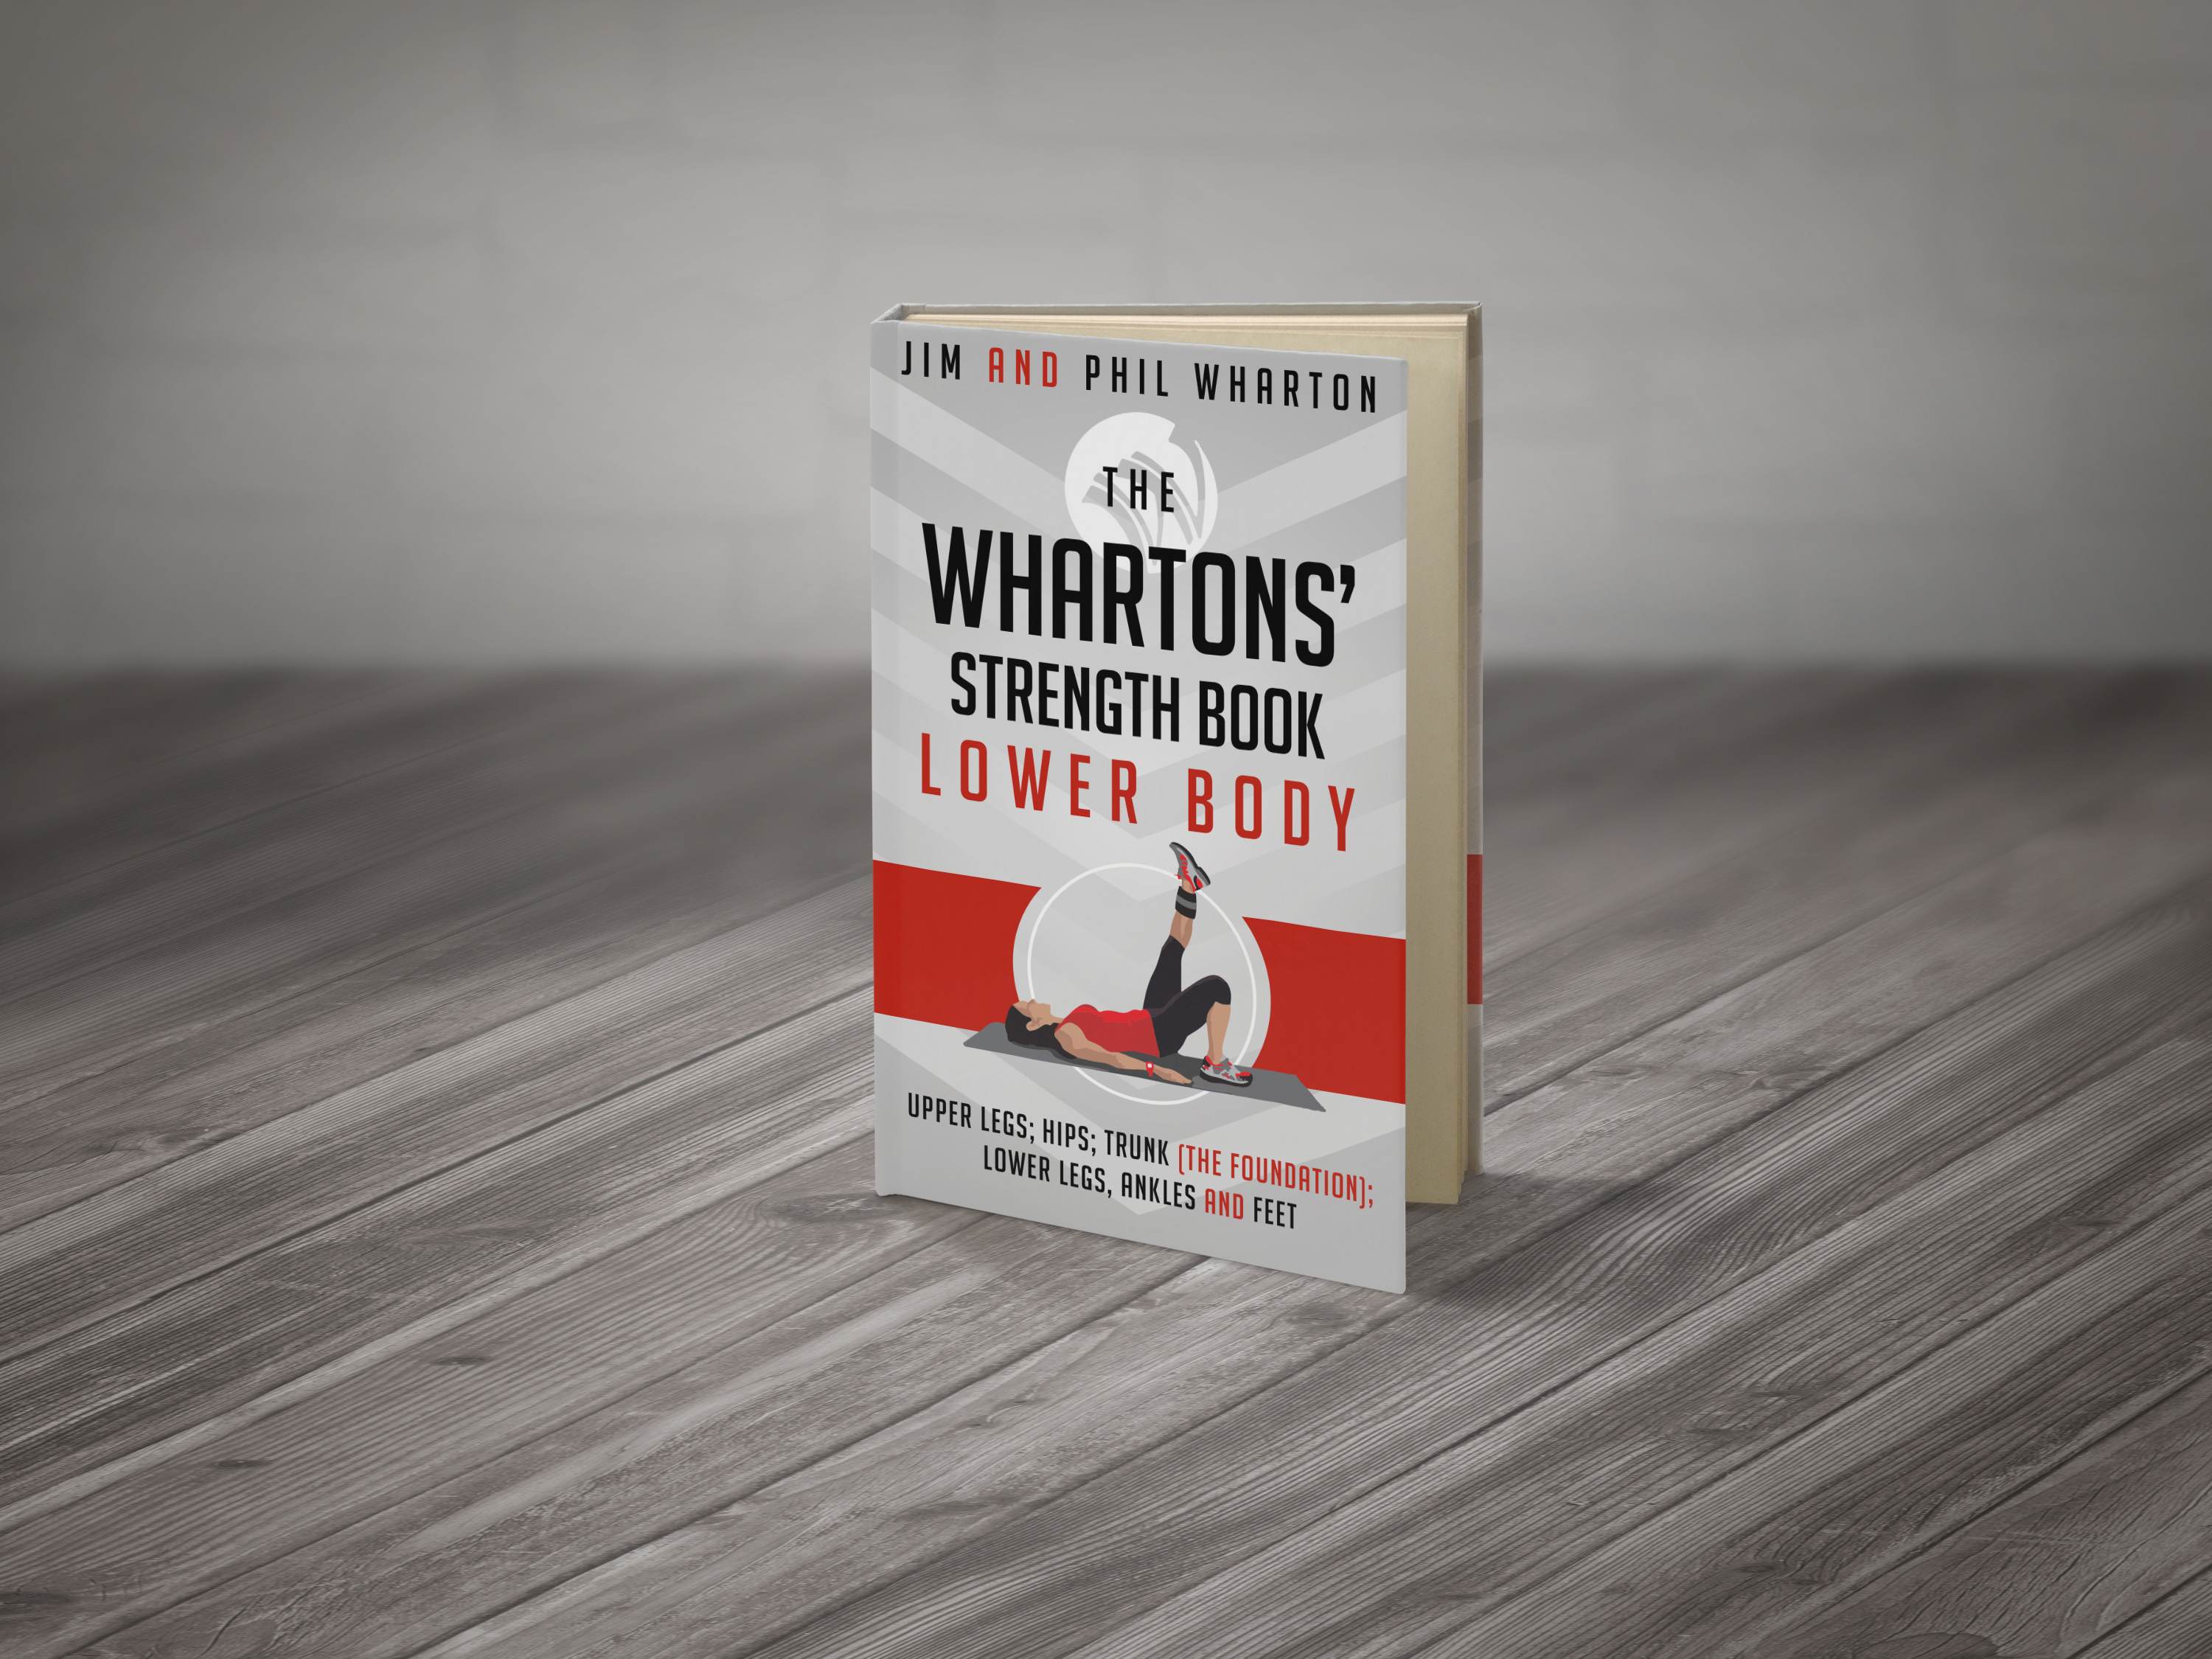 The Whartons Strength Book: Lower Body